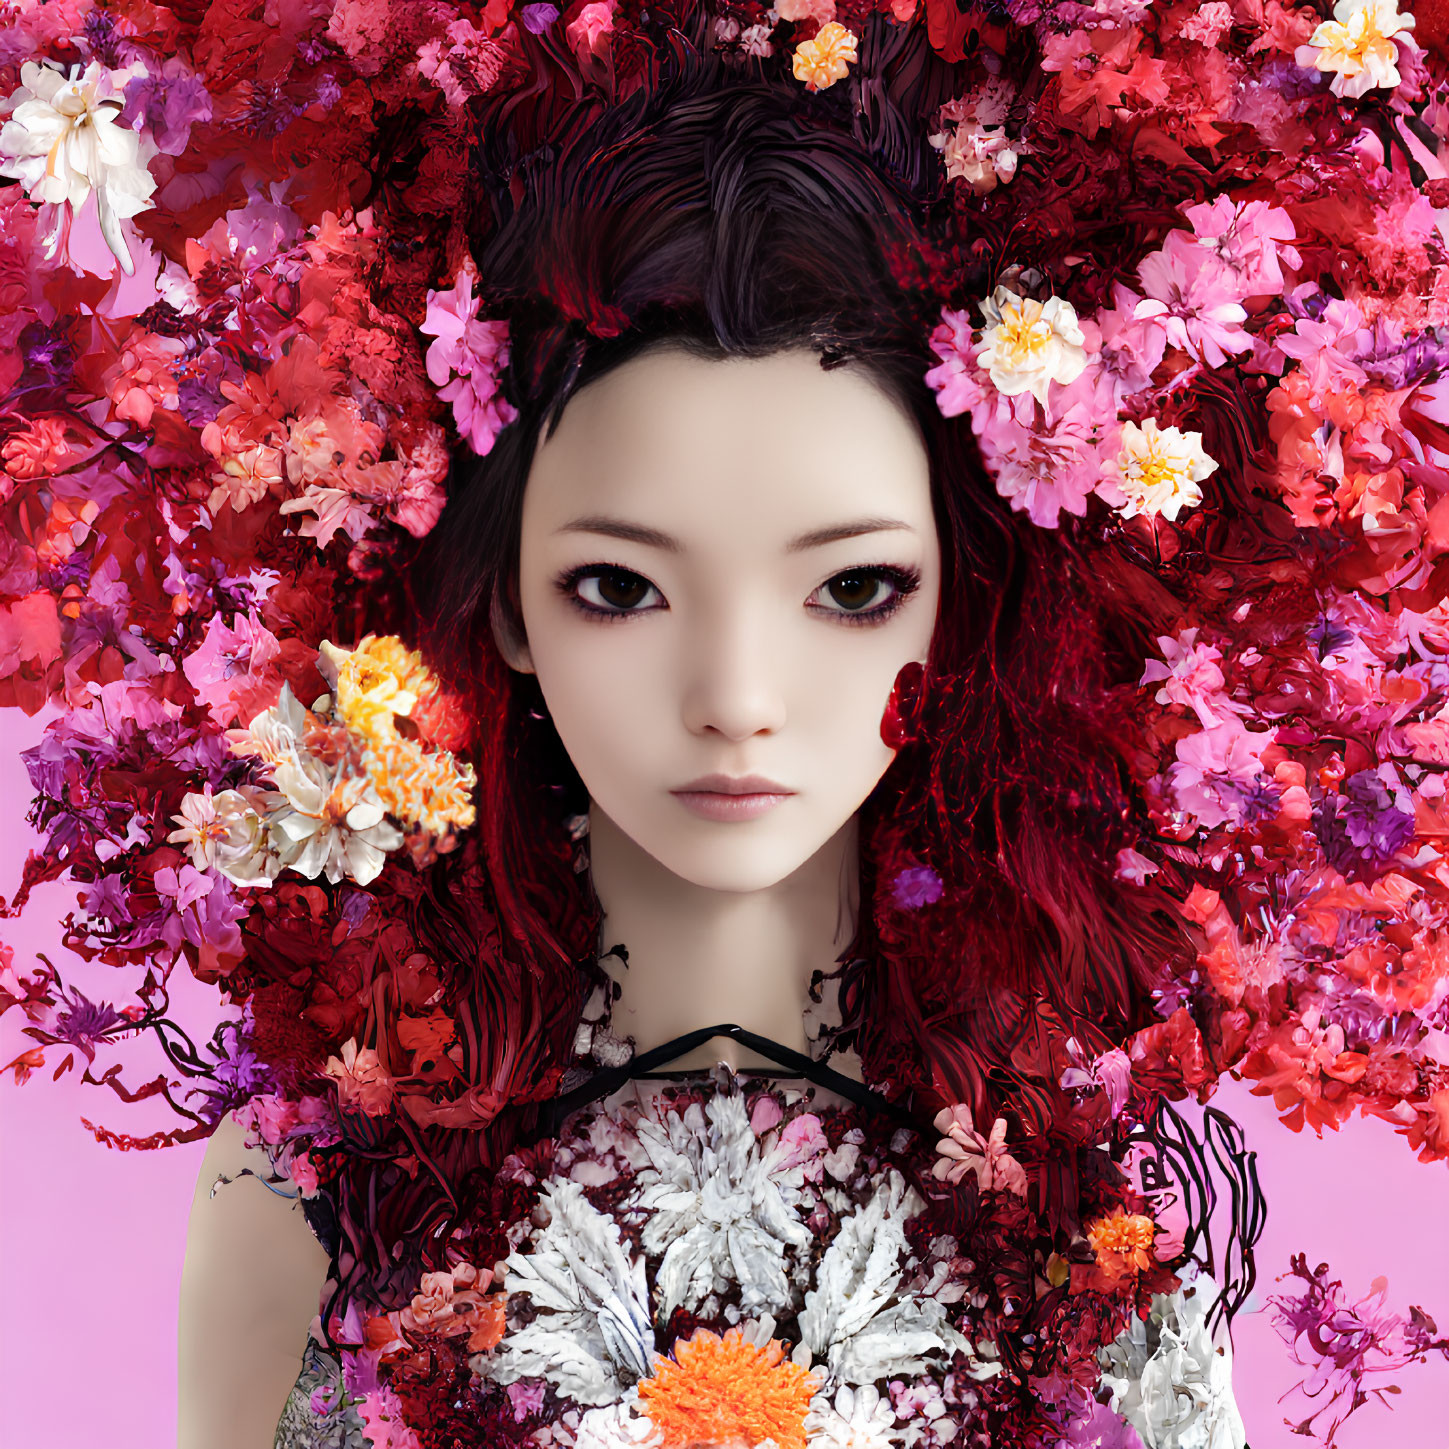 Vibrant red and pink flower headdress on person in digital art